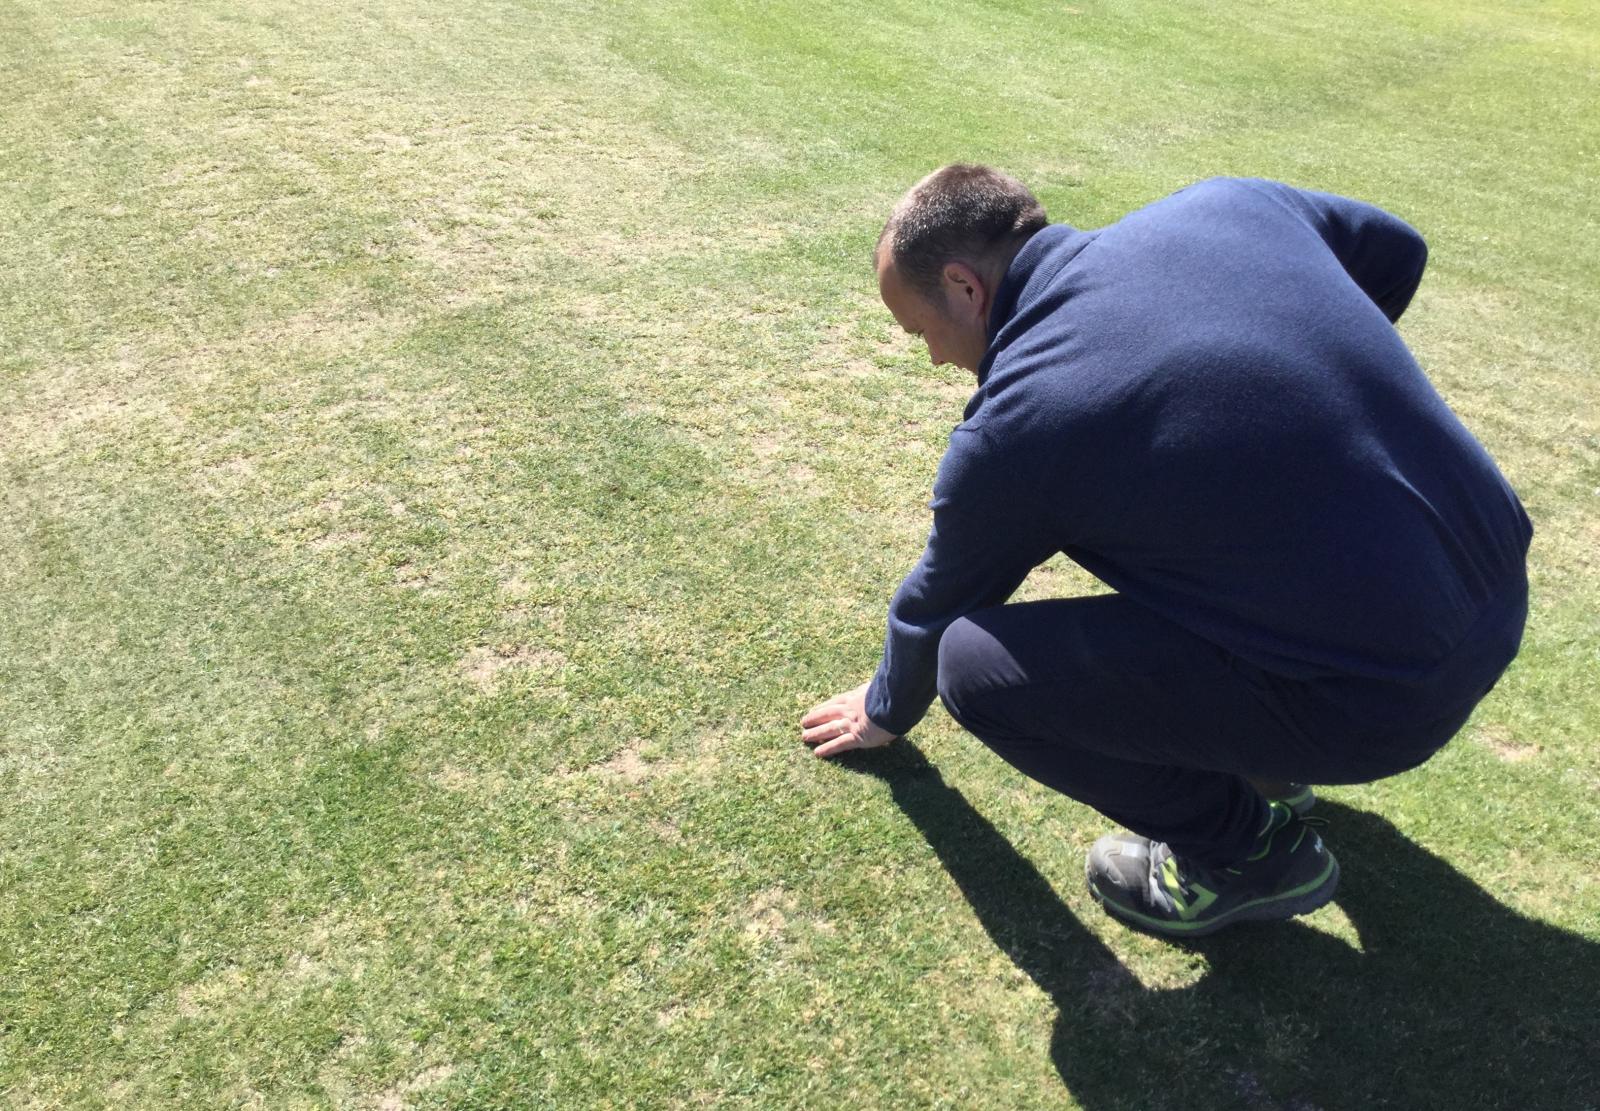 Course manager Dunbar inspecting the turf